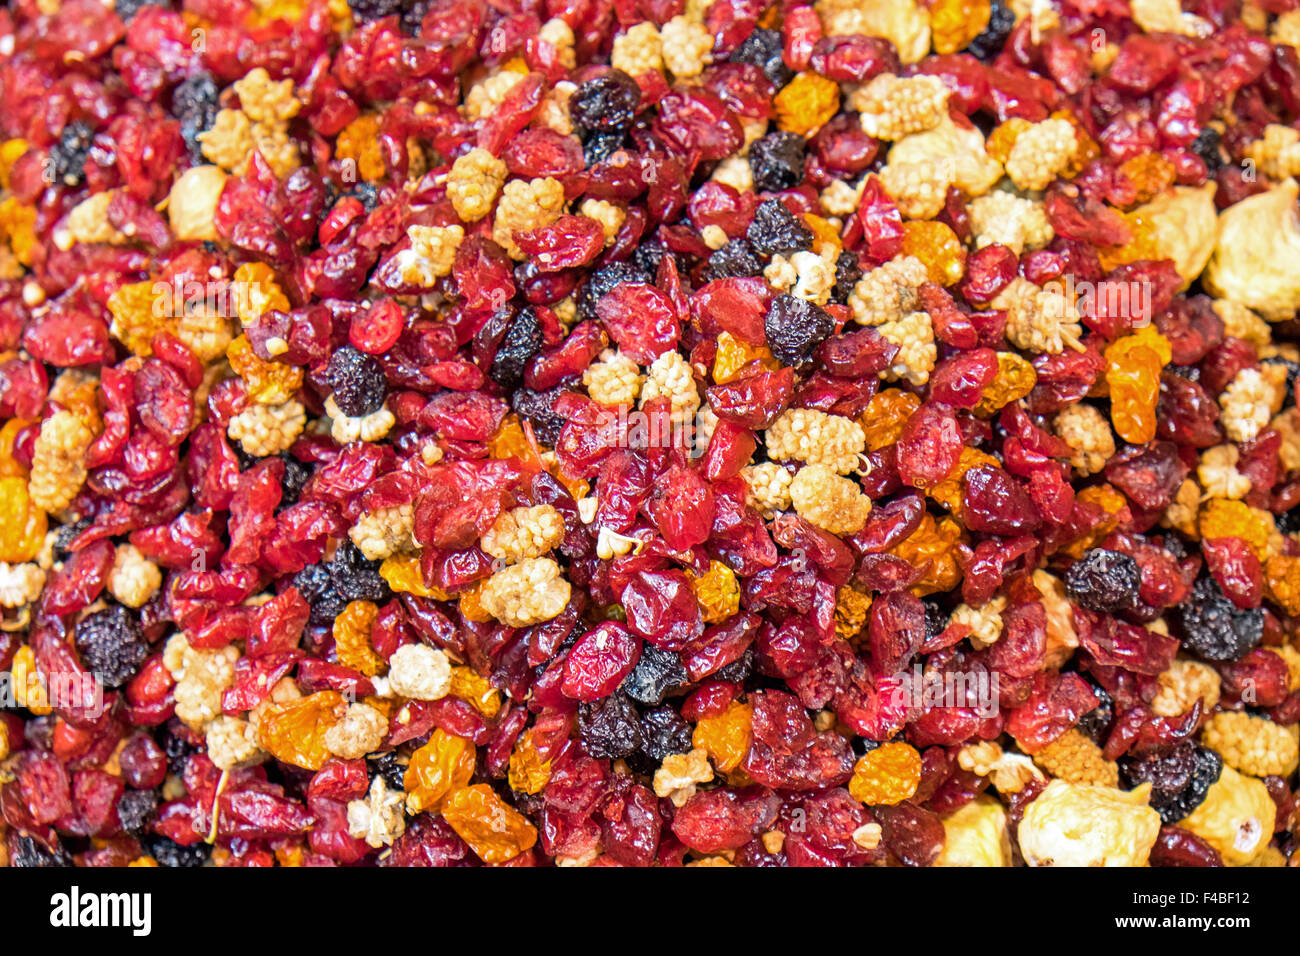 Mixed dried soft fruit at a market Stock Photo